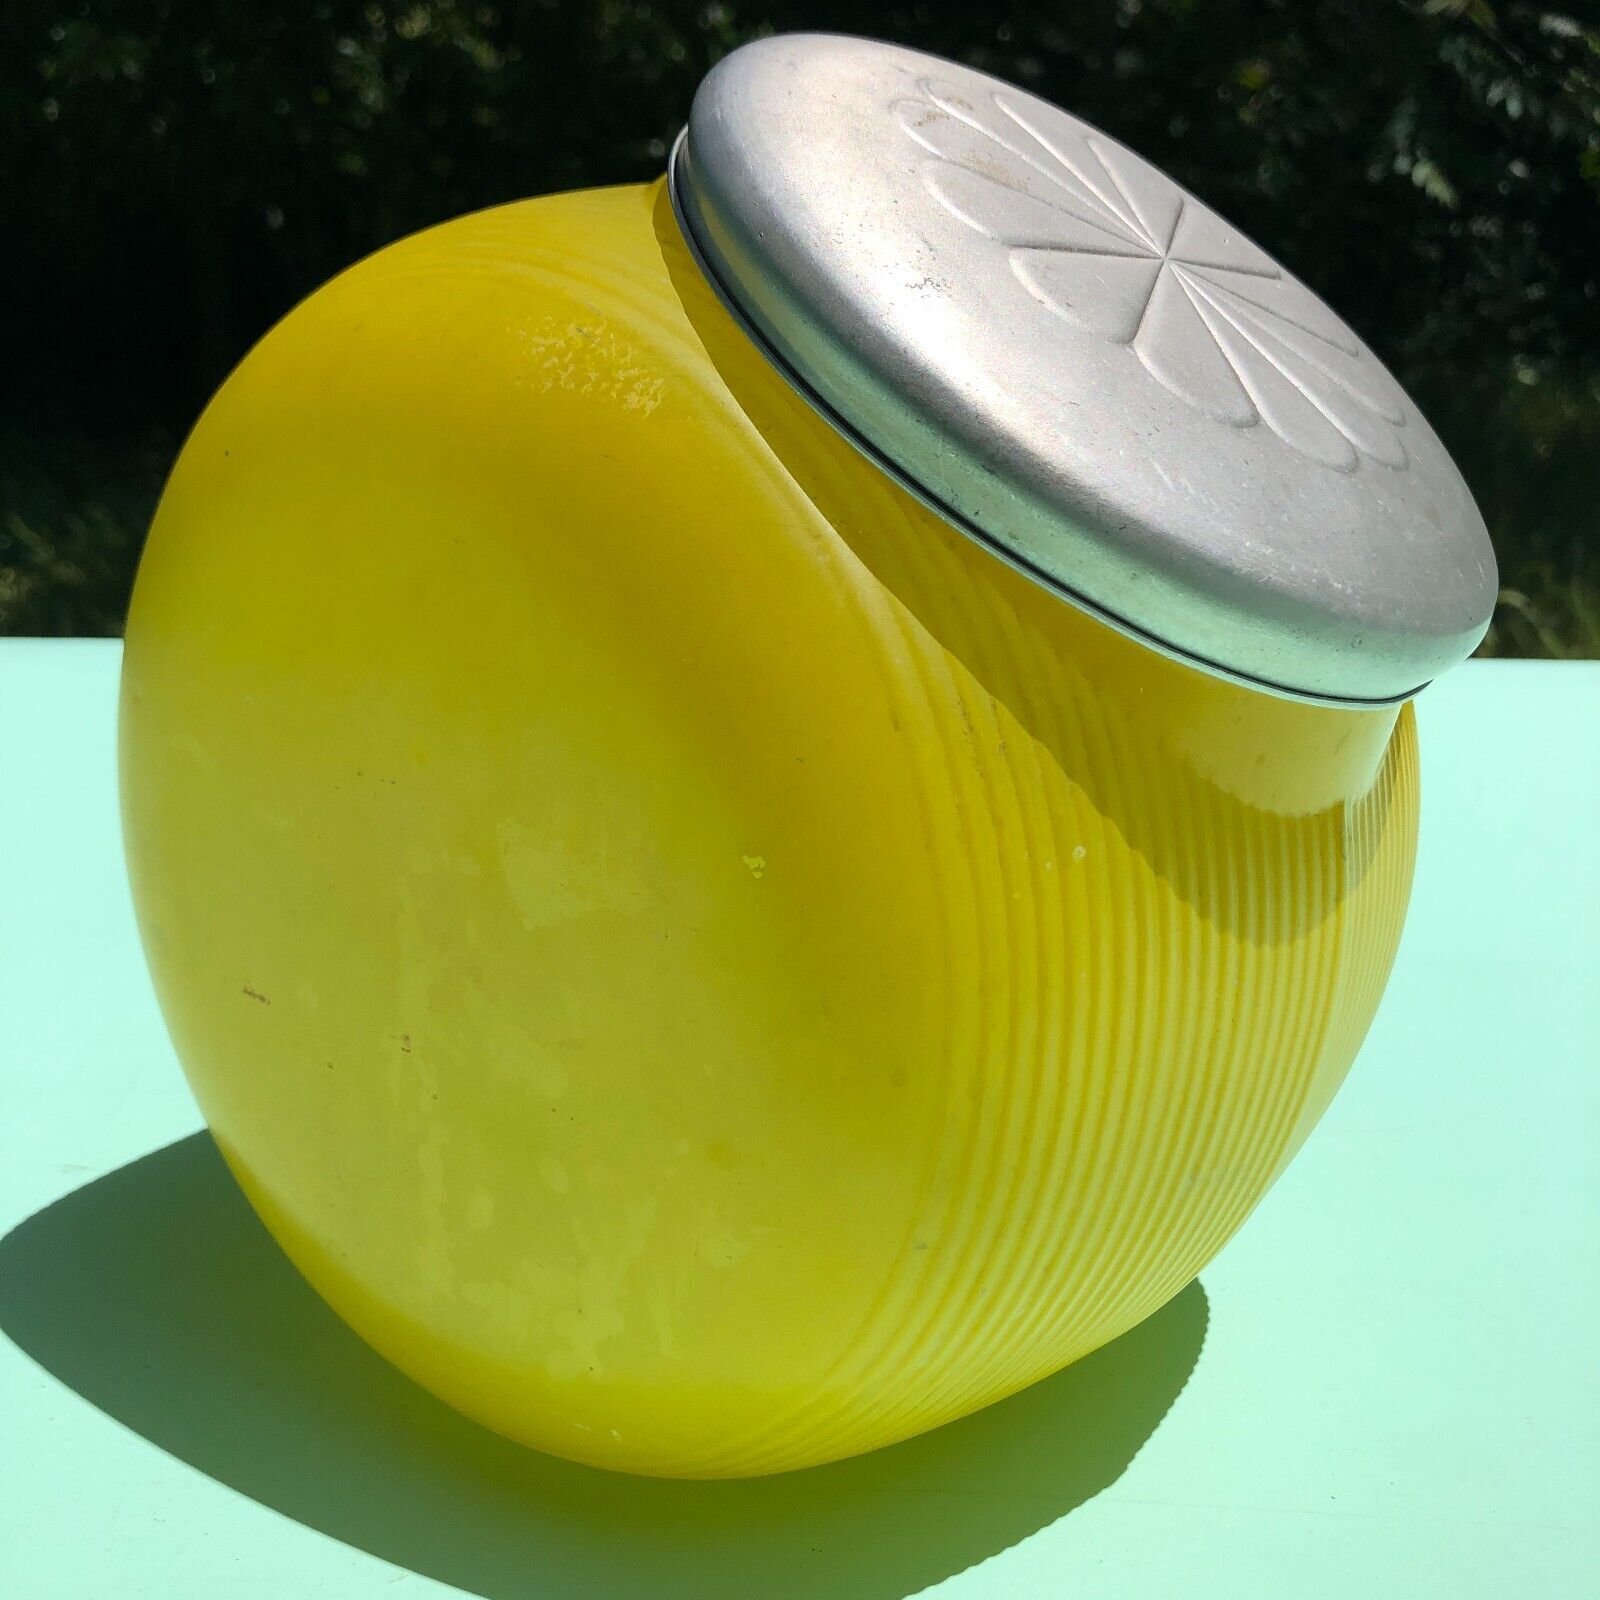 Rare Vintage Cheerful Fired-on Yellow Canister with Lid